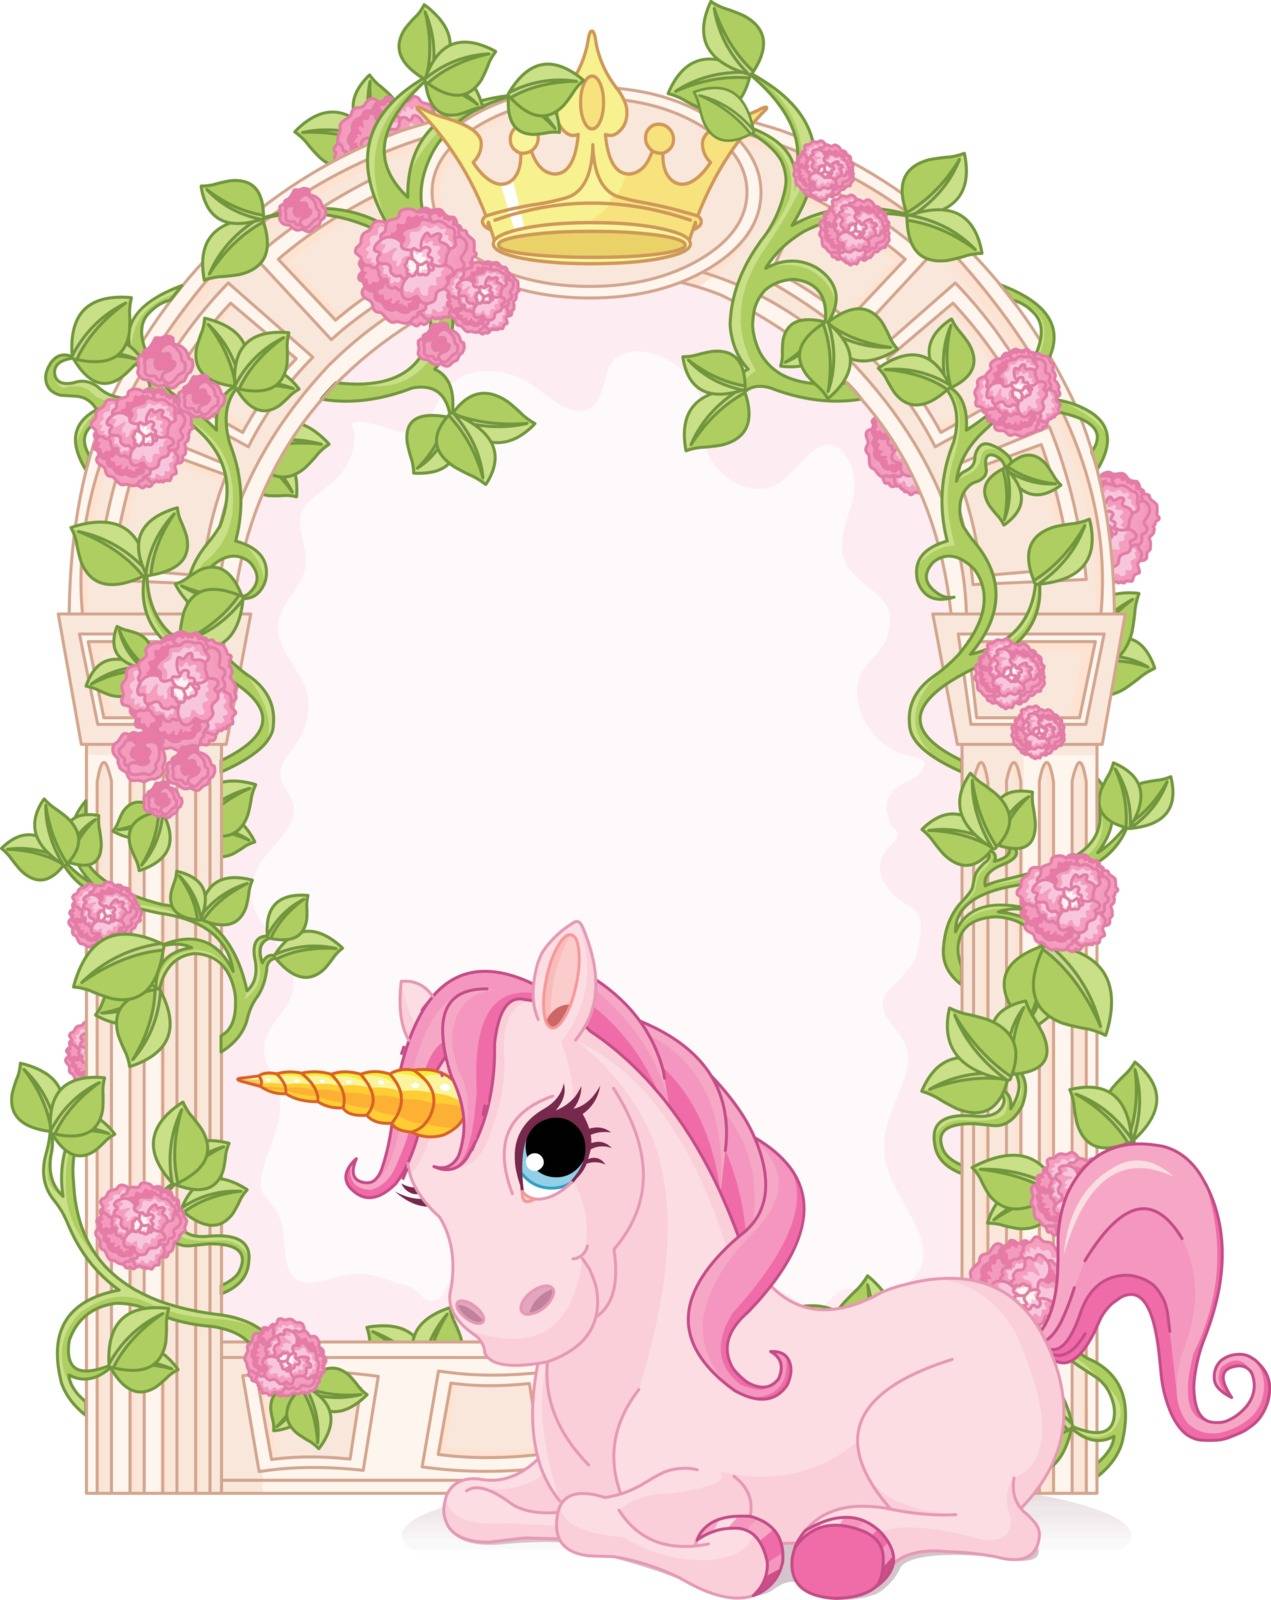 Romantic floral fairy tale frame with unicorn